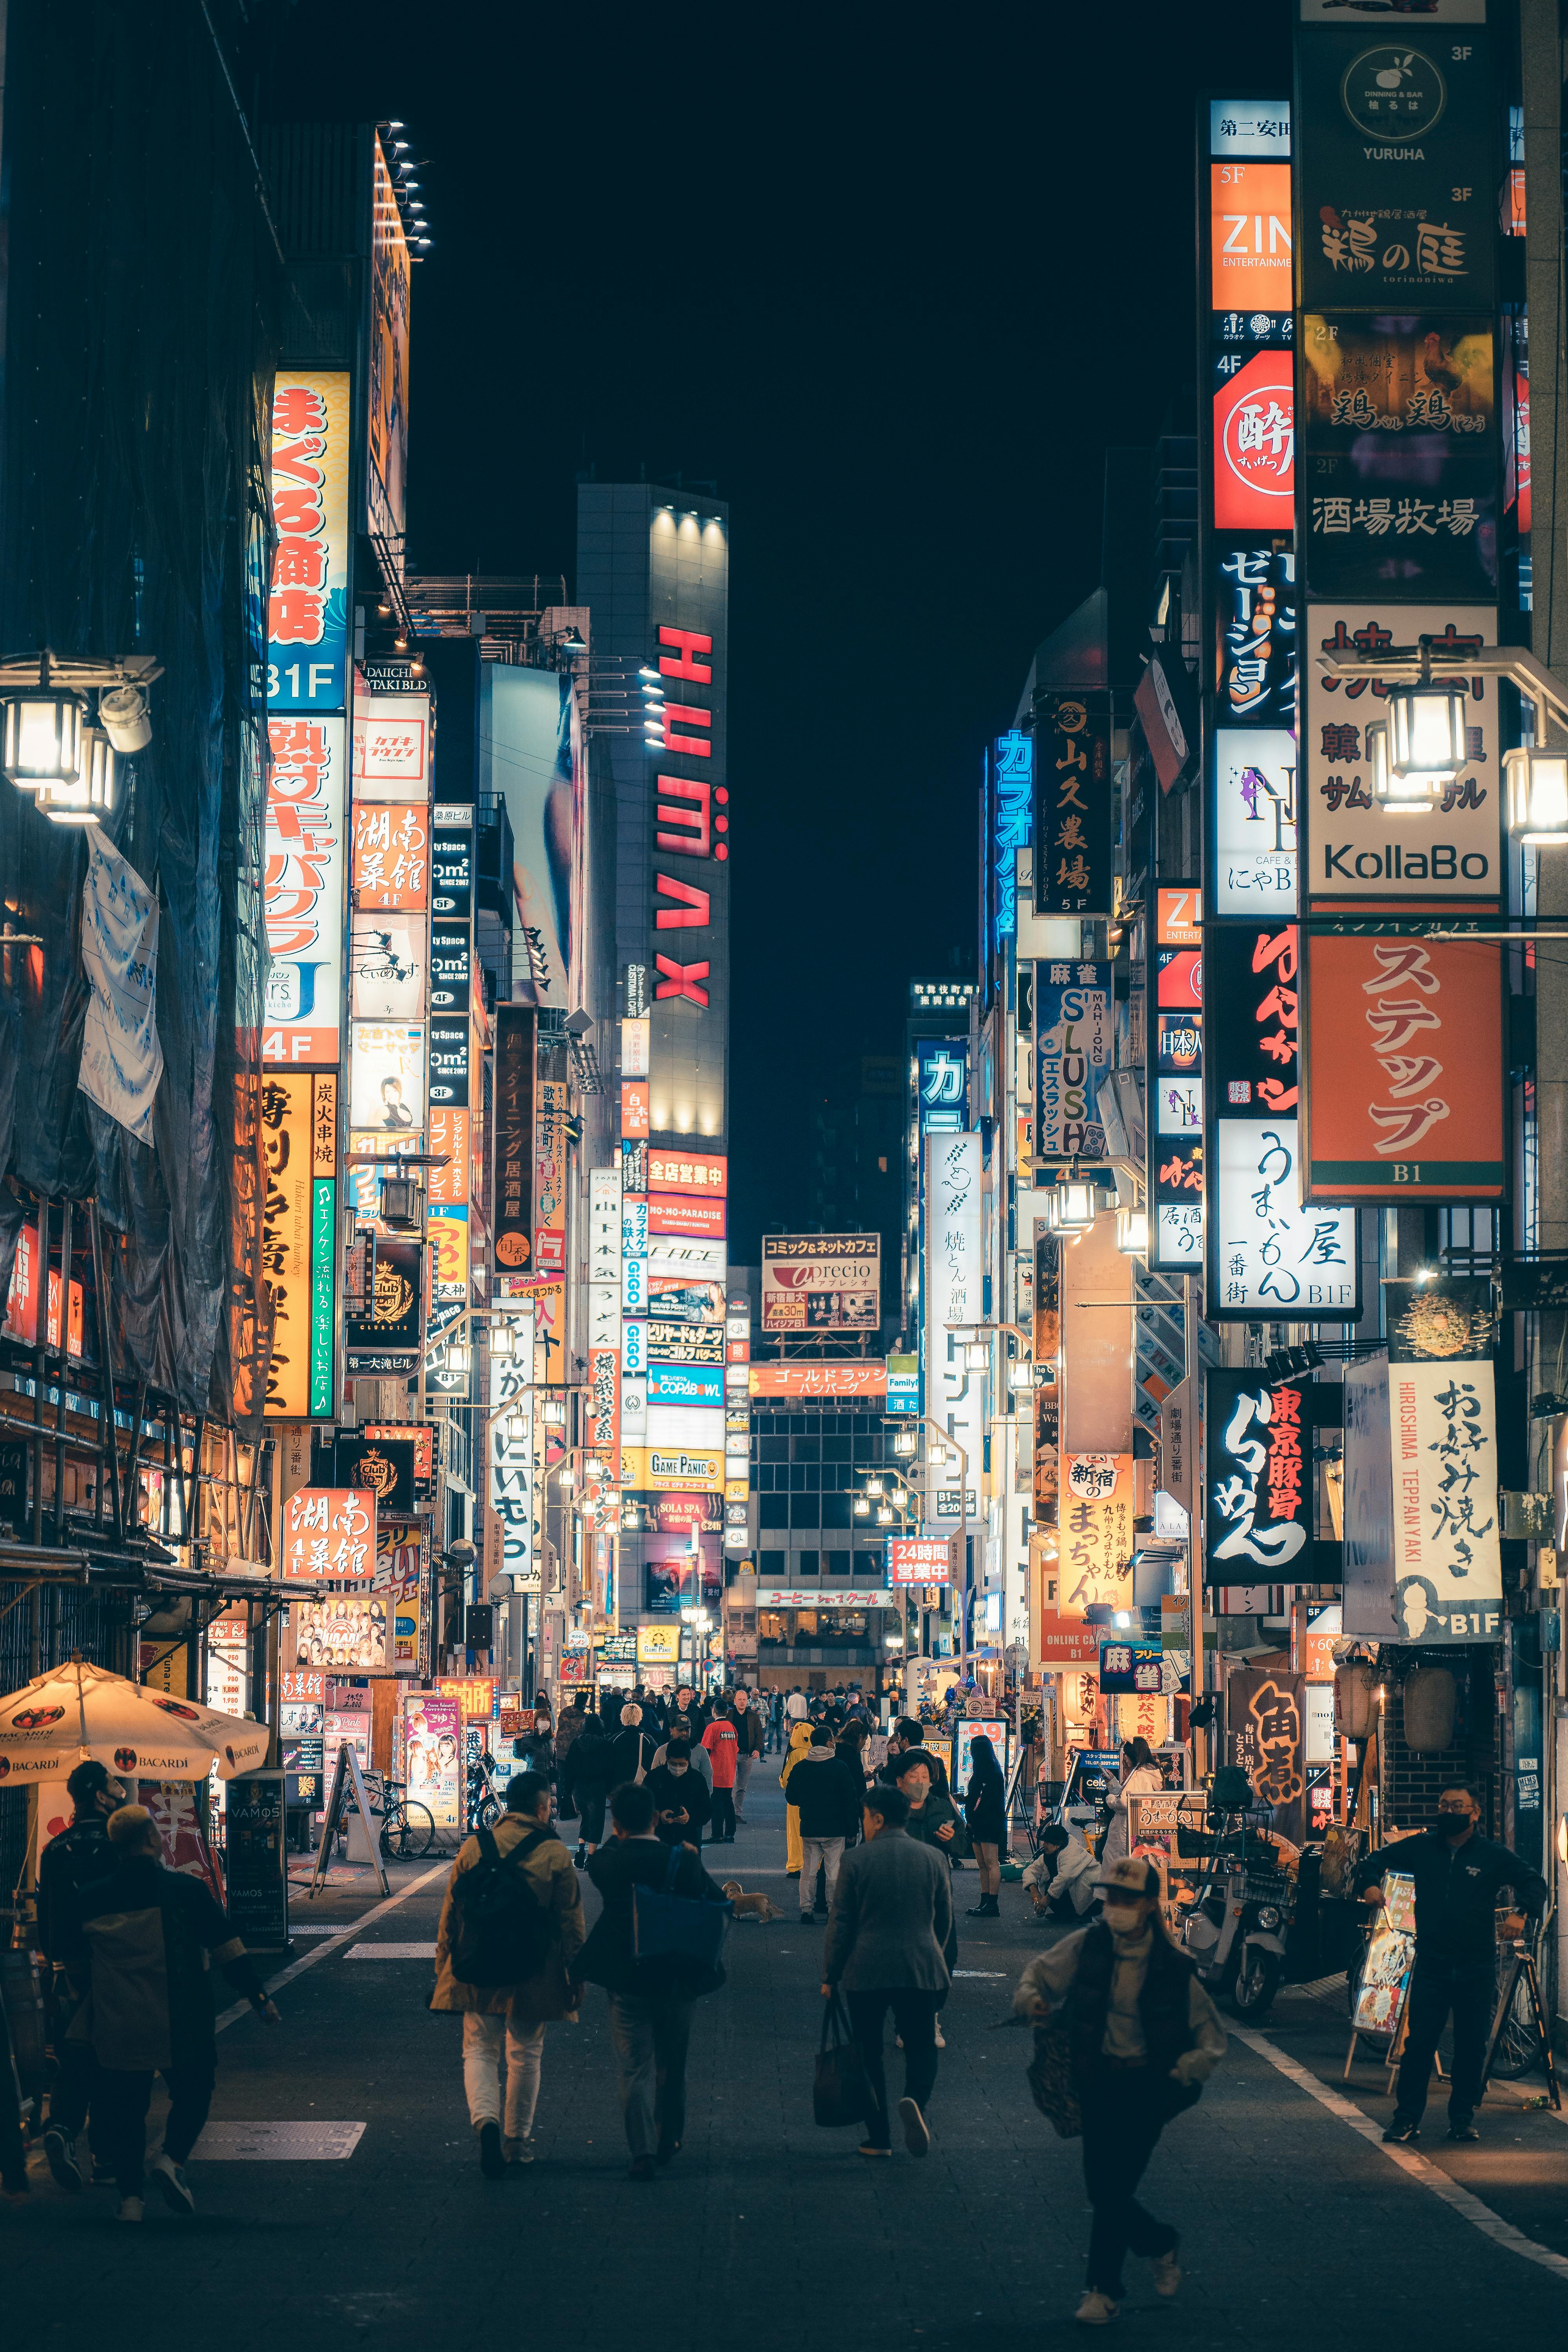 Tokyo Night Images  Free Photos PNG Stickers Wallpapers  Backgrounds   rawpixel